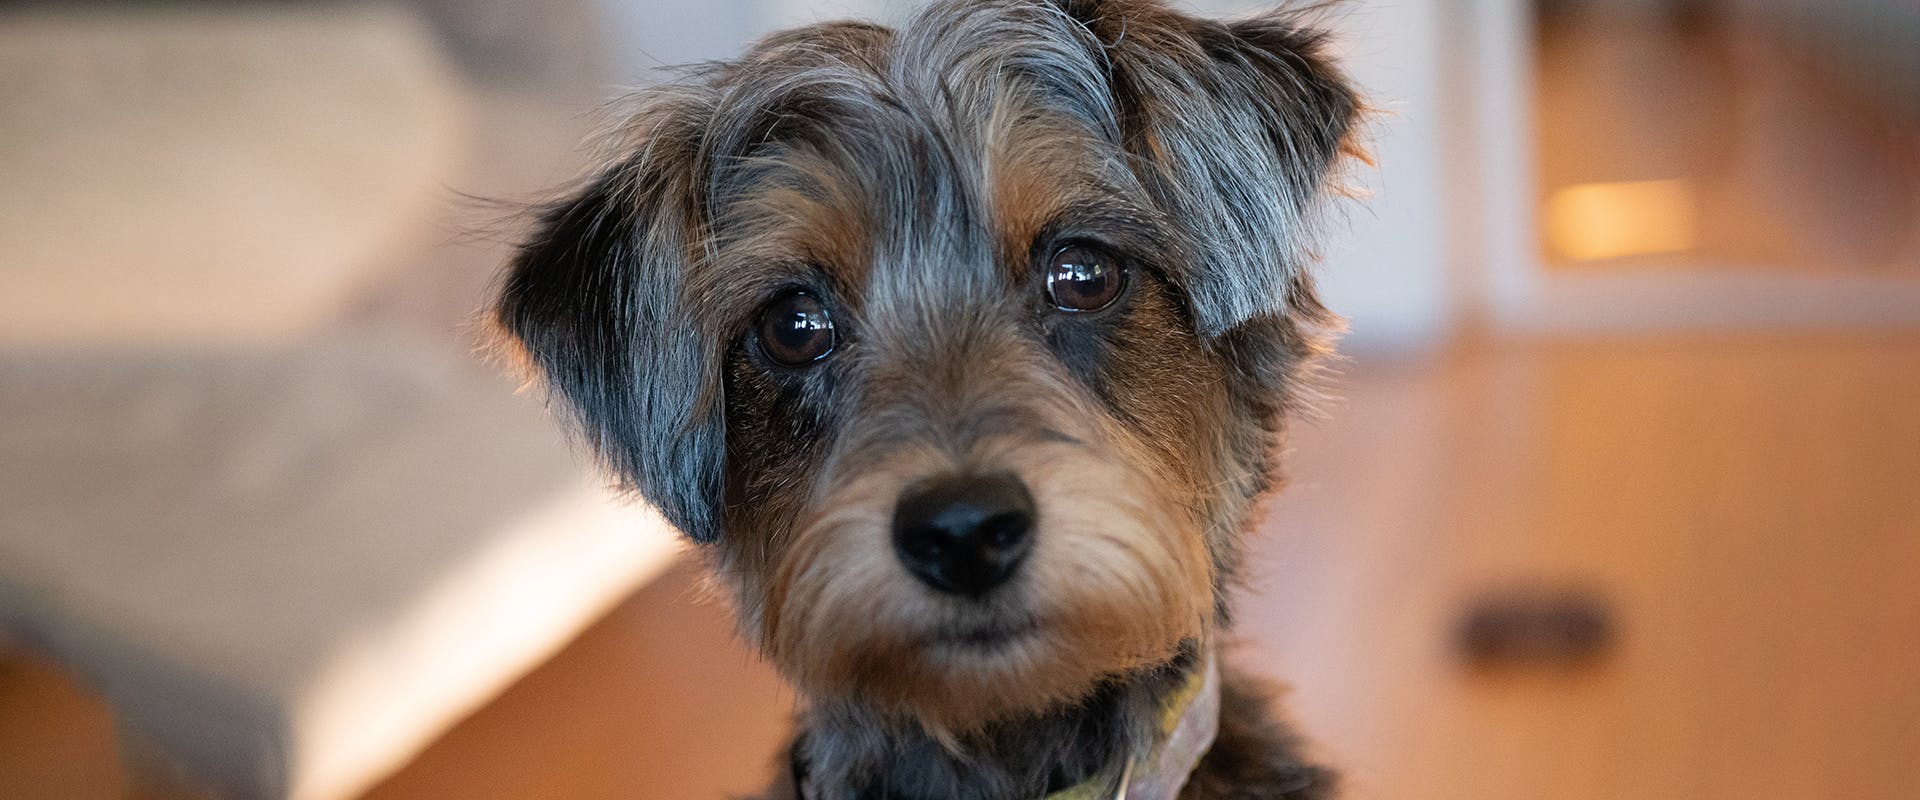 A cute Yorkiepoo puppy looking intensely at the camera